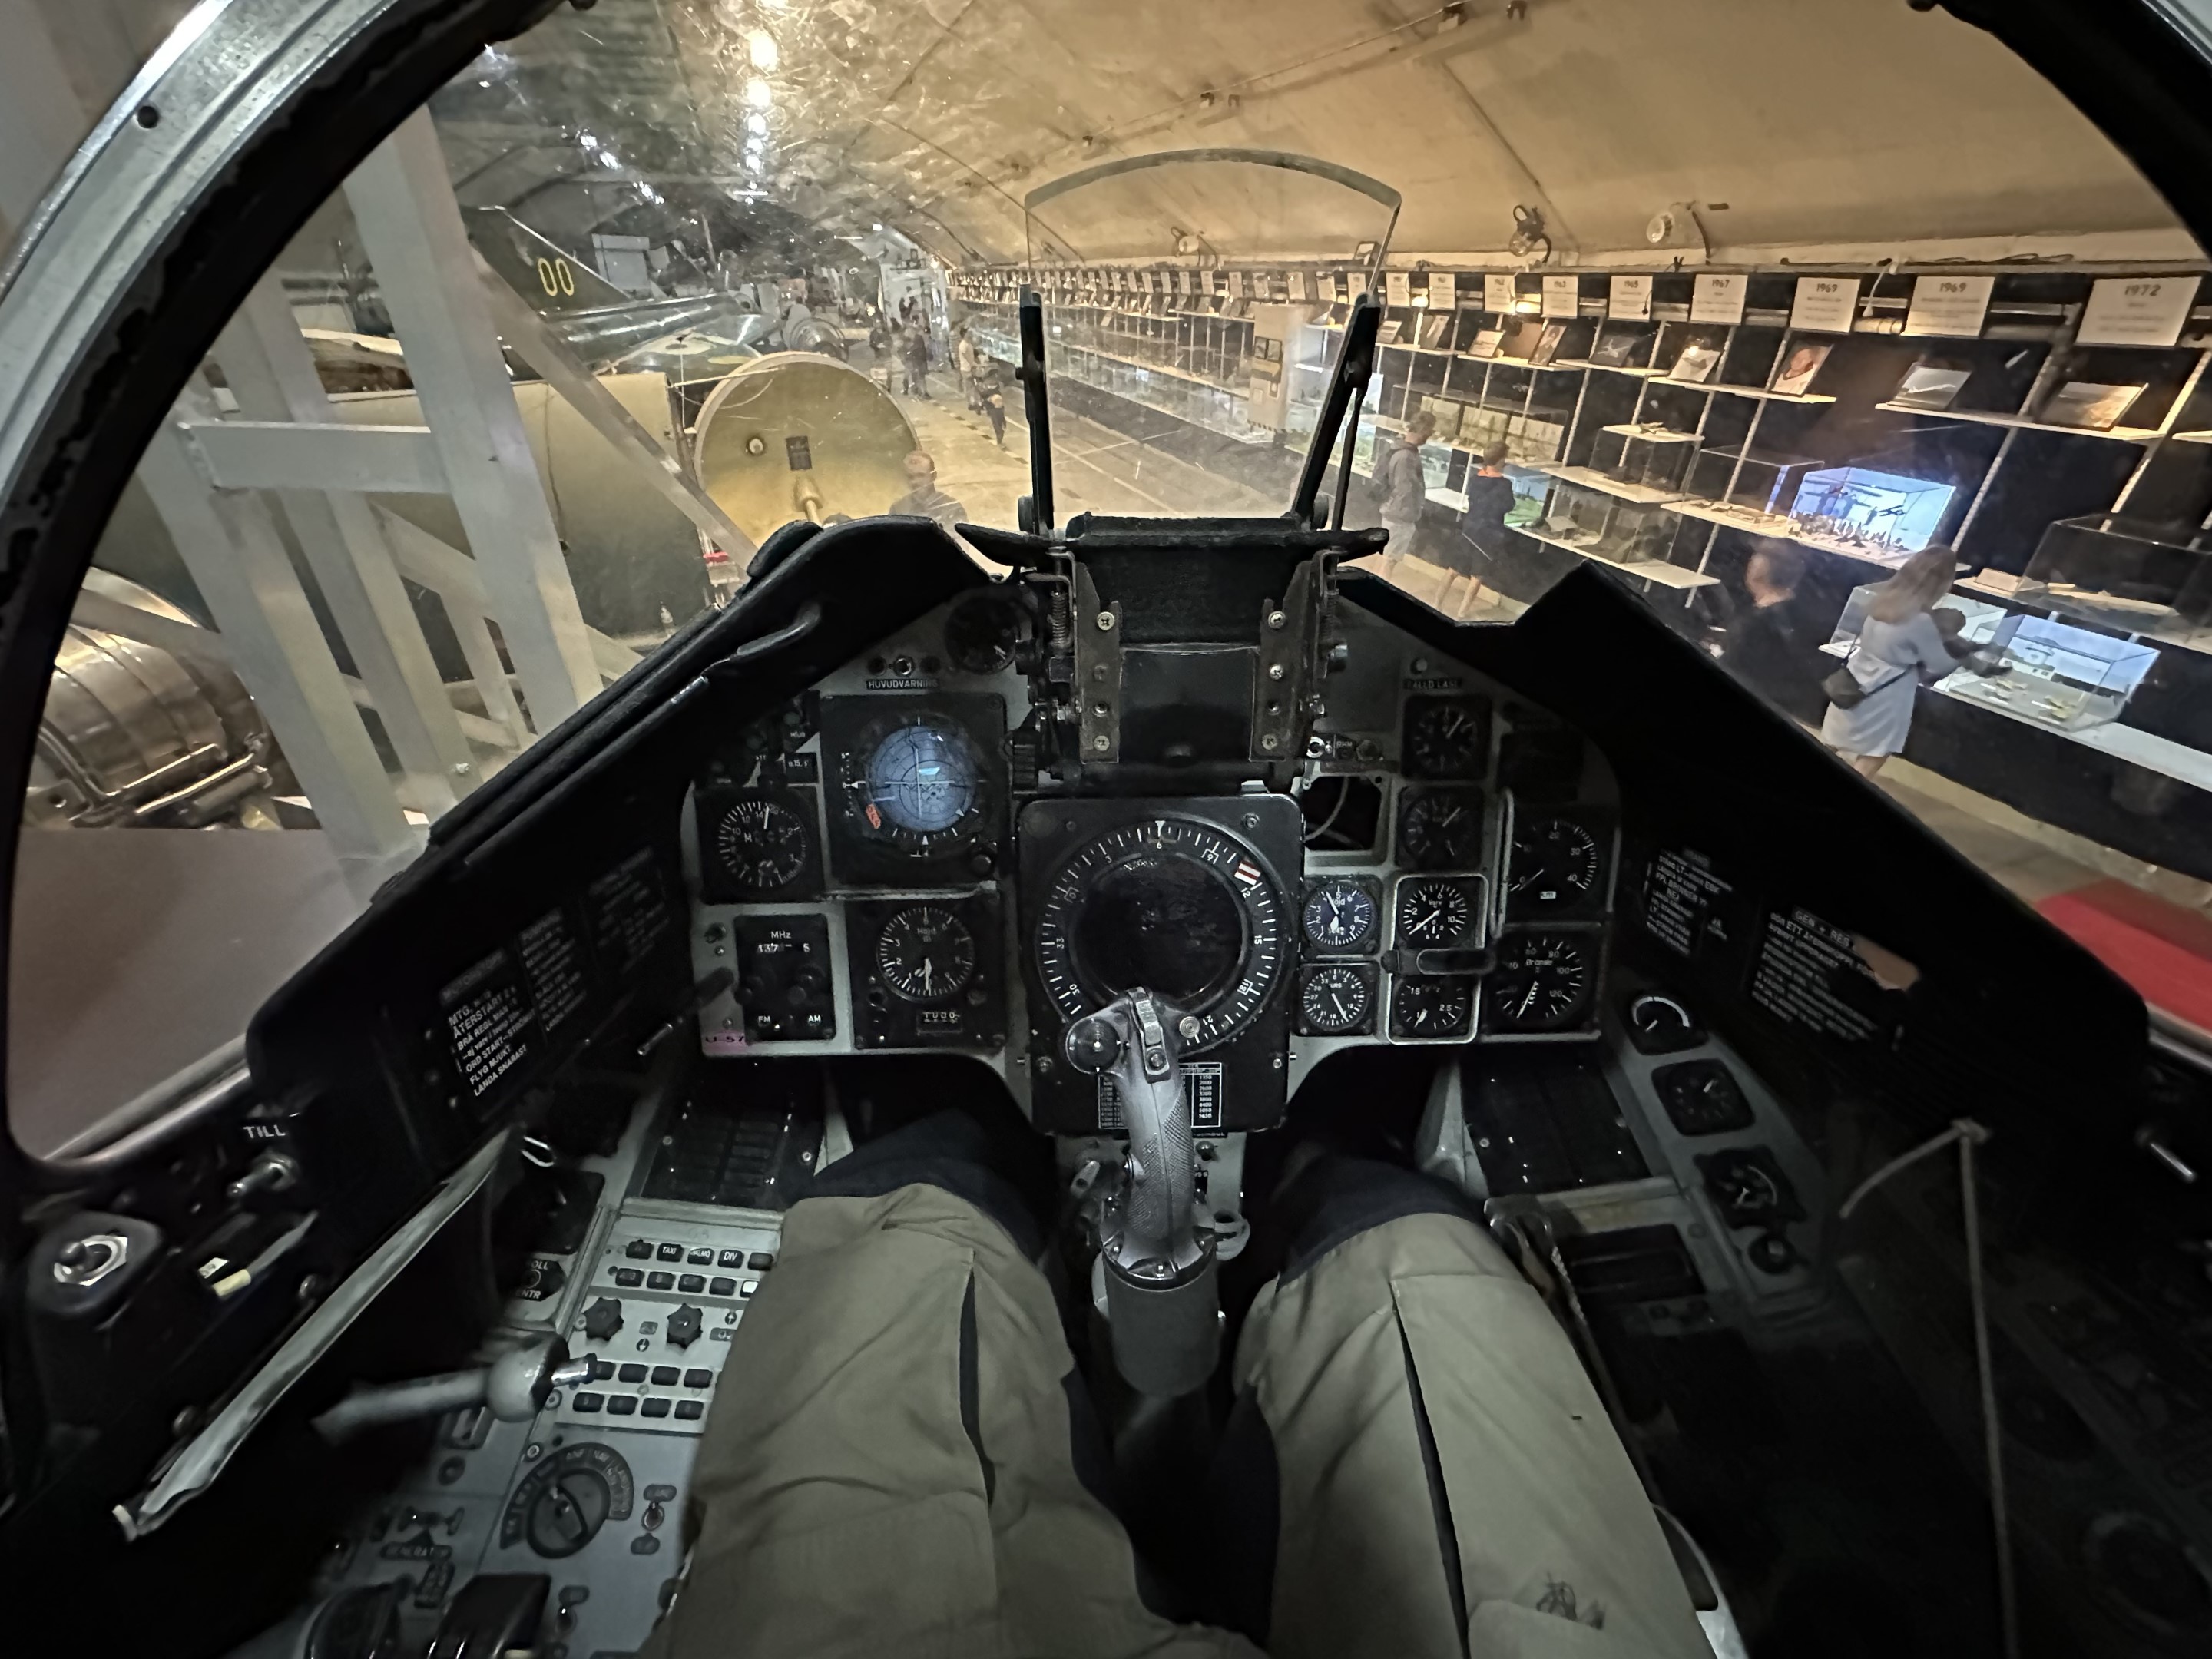 Sitting inside one of the old fighter jets